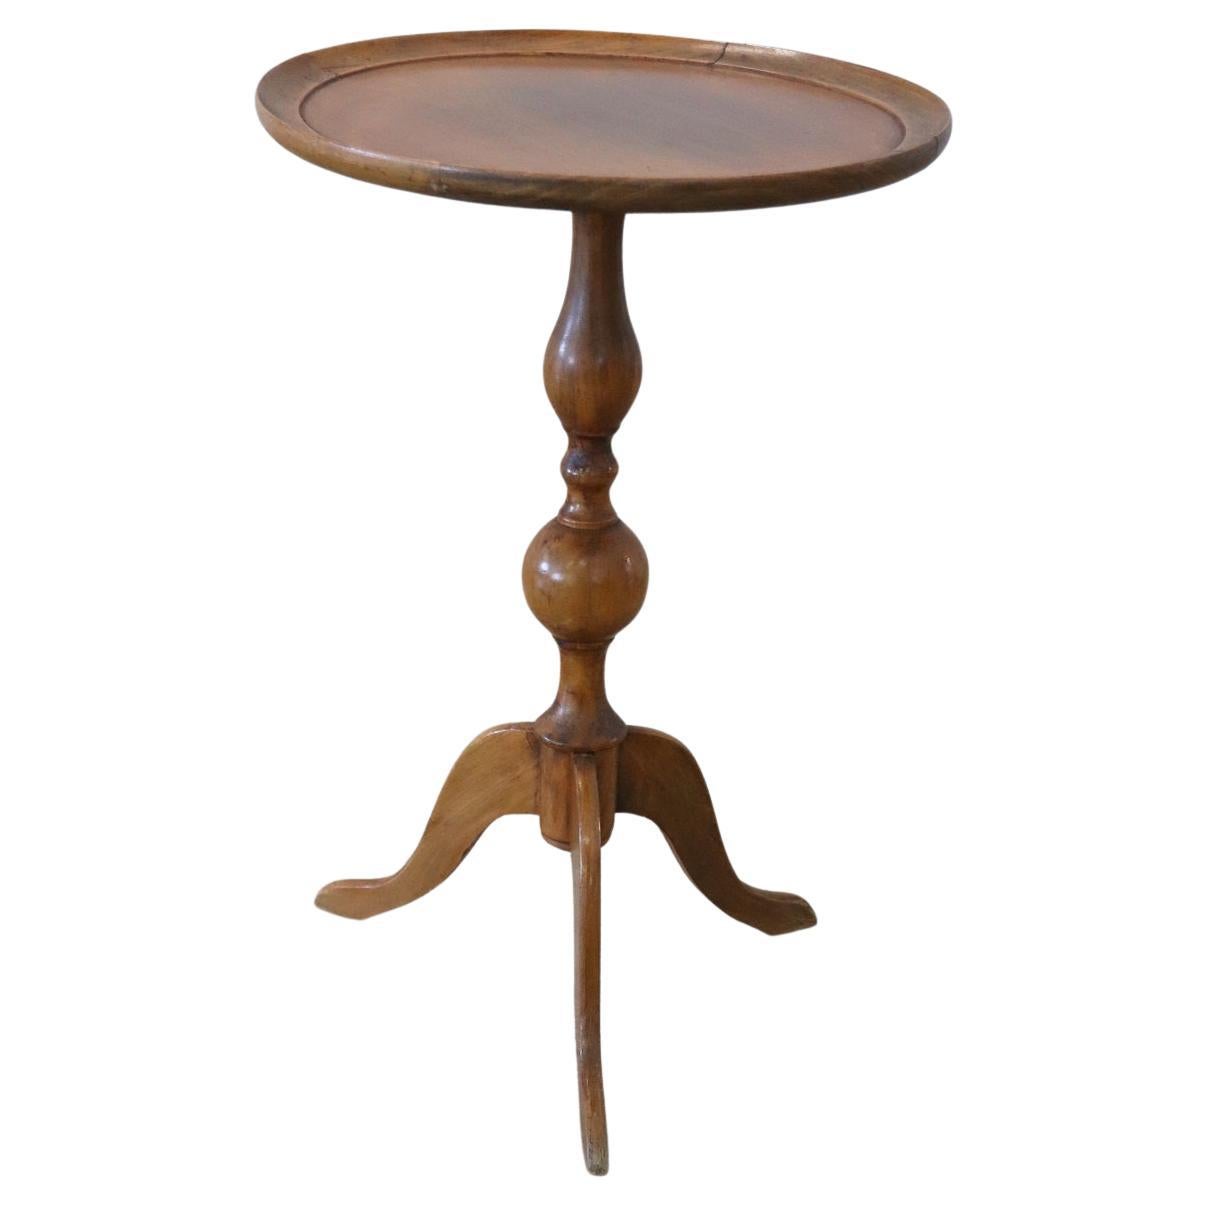 19th Century Italian L Philippe Beech Wood Round Pedestal Table or Smoking Table